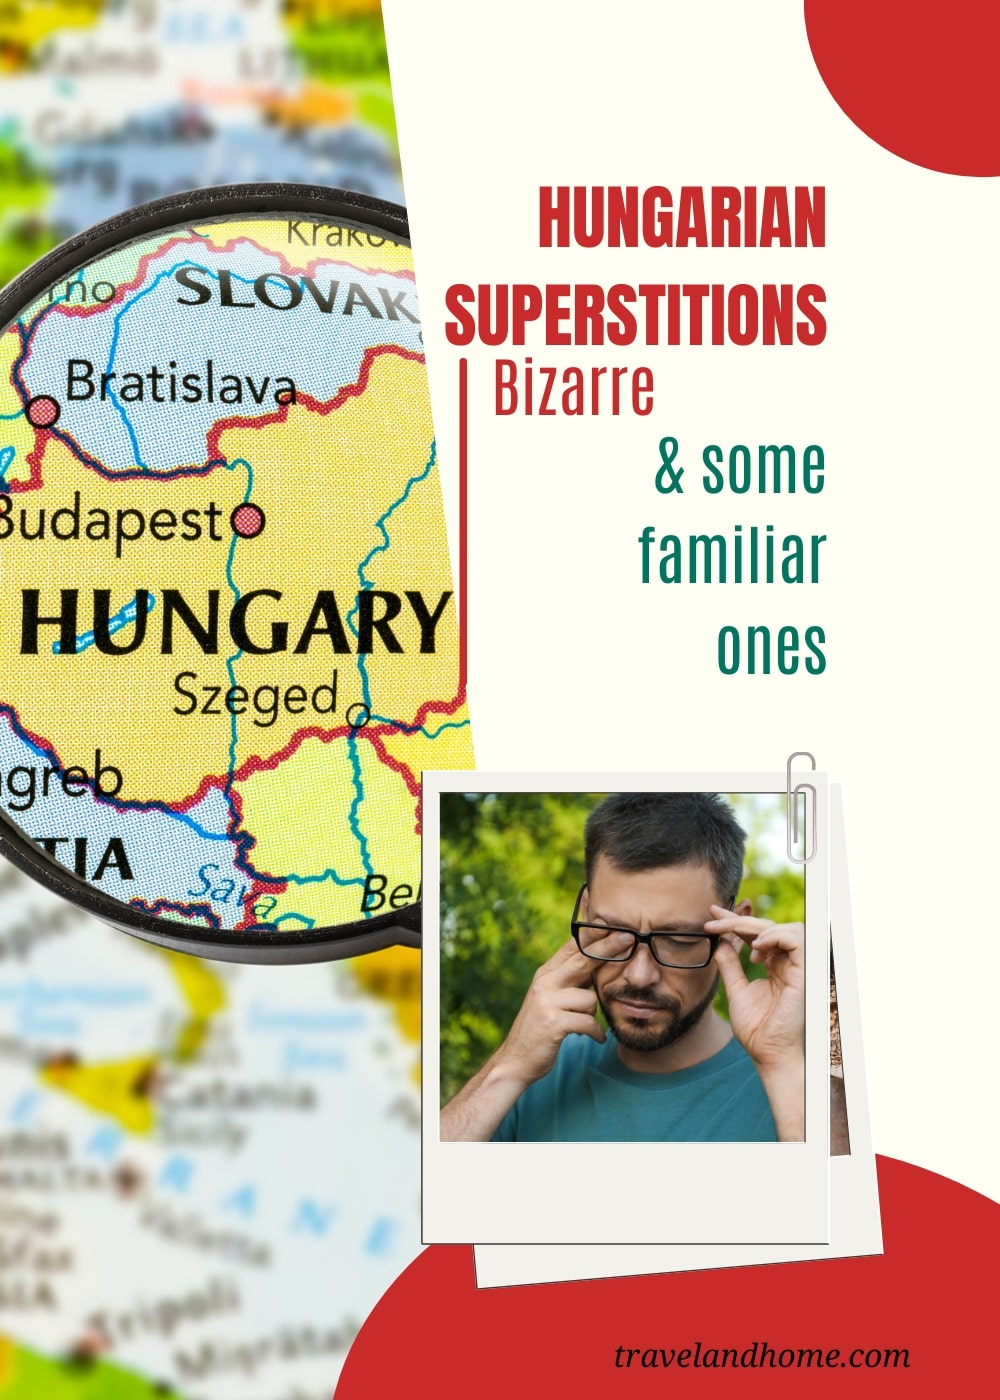 Bizarre and Familiar Hungarian superstitions, Hungarian culture, travel and home min